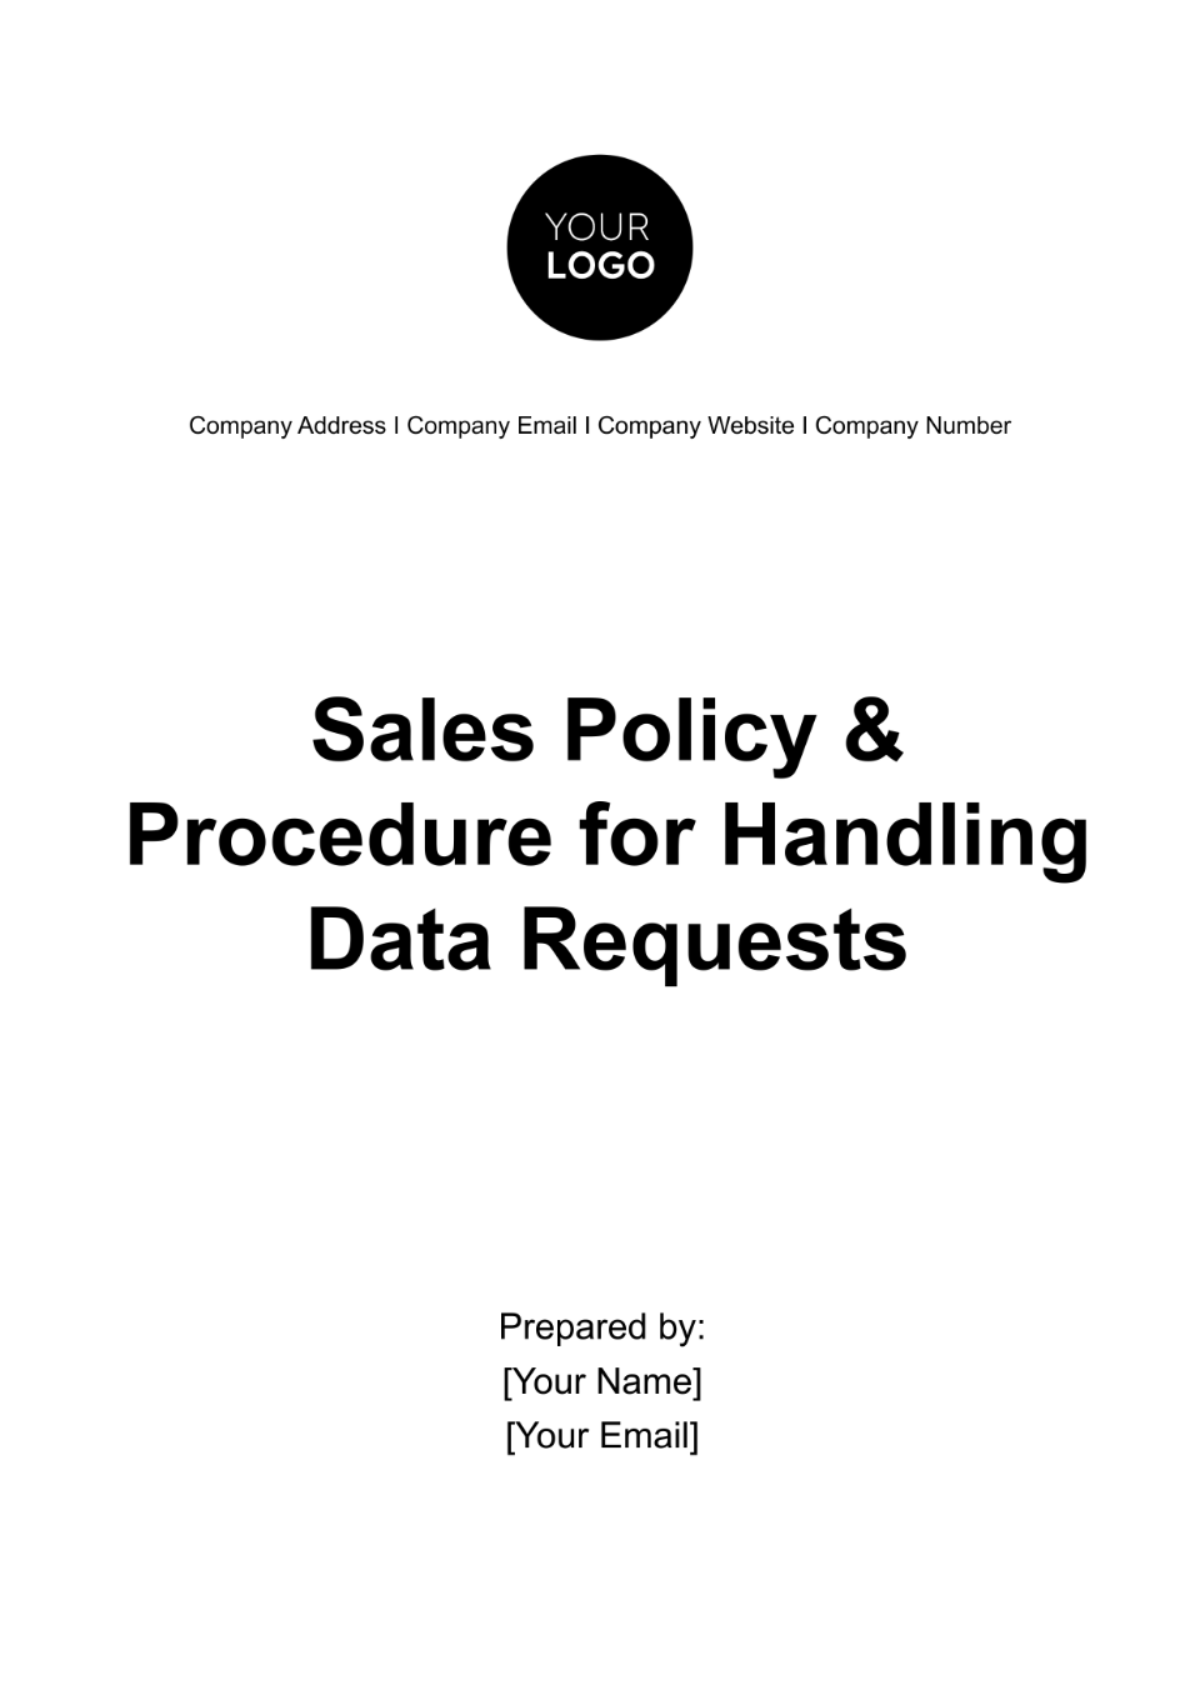 Free Sales Policy & Procedure for Handling Data Requests Template